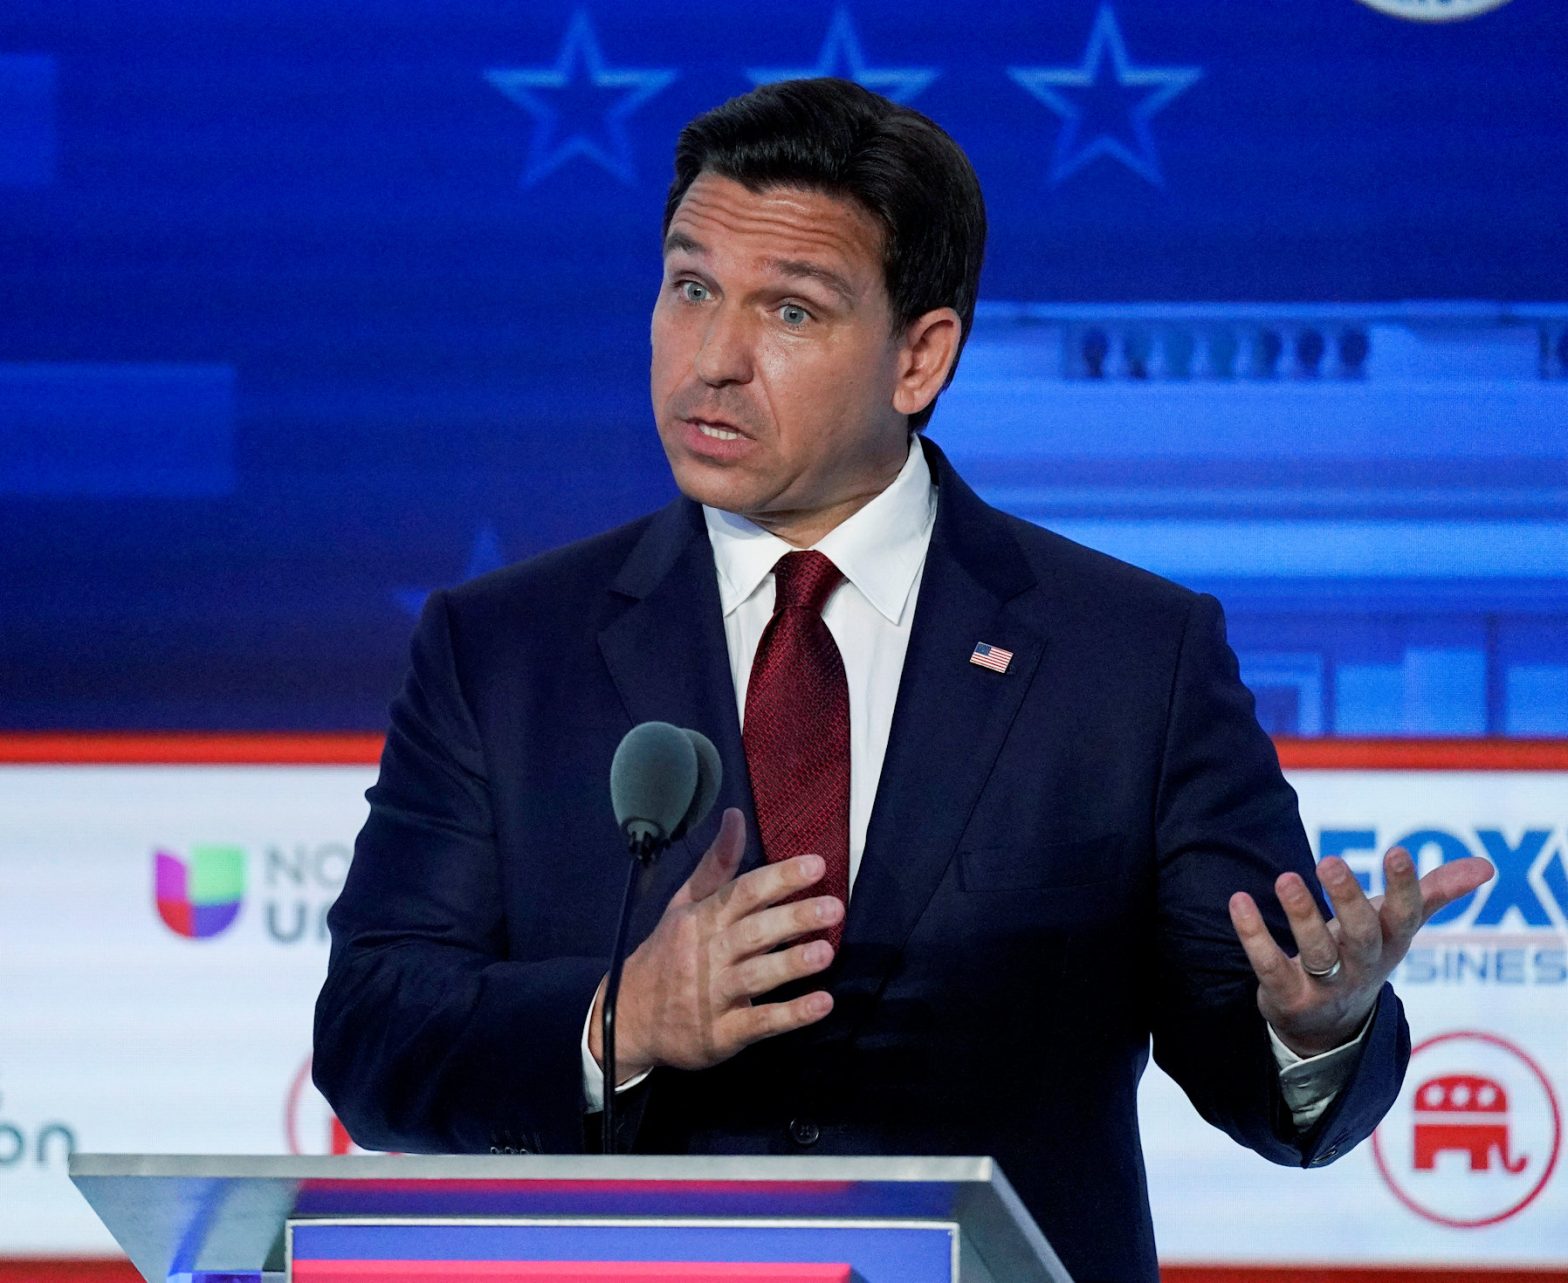 DeSantis Said He Would Support 15-Week Abortion Ban